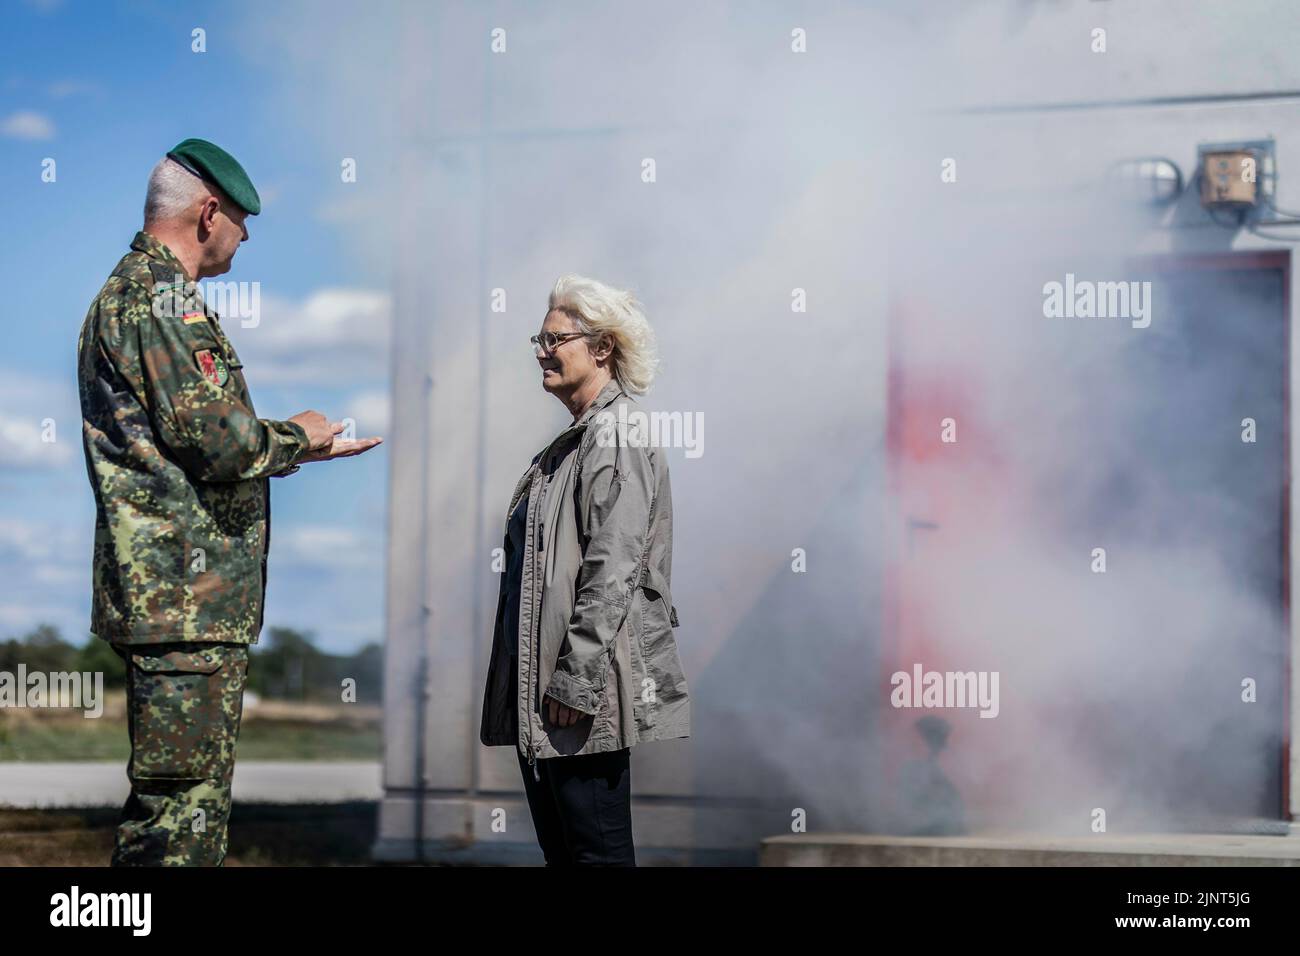 Mali. 11th July, 2022. Christine Lambrecht (SPD), Federal Minister of Defence, taken during a simulation at the Bundeswehr Combat Training Center in Schnoeggersburg, July 11, 2022. Soldiers from the Jaeger battalion are preparing for deployment in Mali. Credit: dpa/Alamy Live News Stock Photo